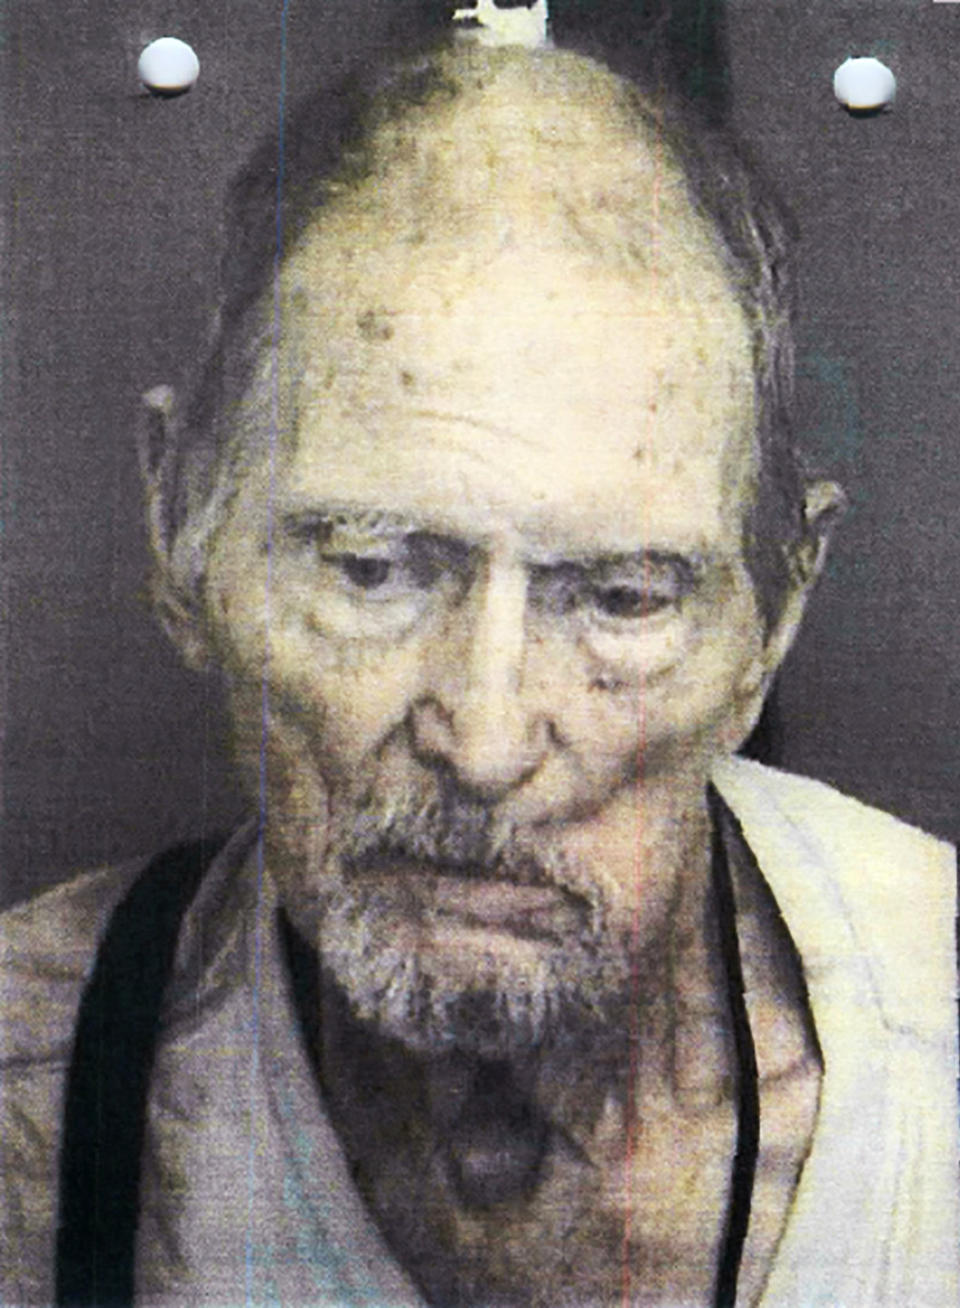 This October, 2019 booking photo from the Custer County Sheriff's Office shows Walter James Mason. Forty years ago, Brett Woolley's father Dan Woolley was shot in the parking lot of a small town bar deep in the Idaho mountains. Then the shooter crossed the street to the only other bar in town, ordered a drink, declared, "I just killed a man," and disappeared into the night. As days turned into years, Woolley accepted the likelihood that his father's murderer would never be found. But all that changed last fall when authorities arrested a former pro rodeo rider named Walter Mason in a small Texas village. (Custer County Sheriff's Office via AP)